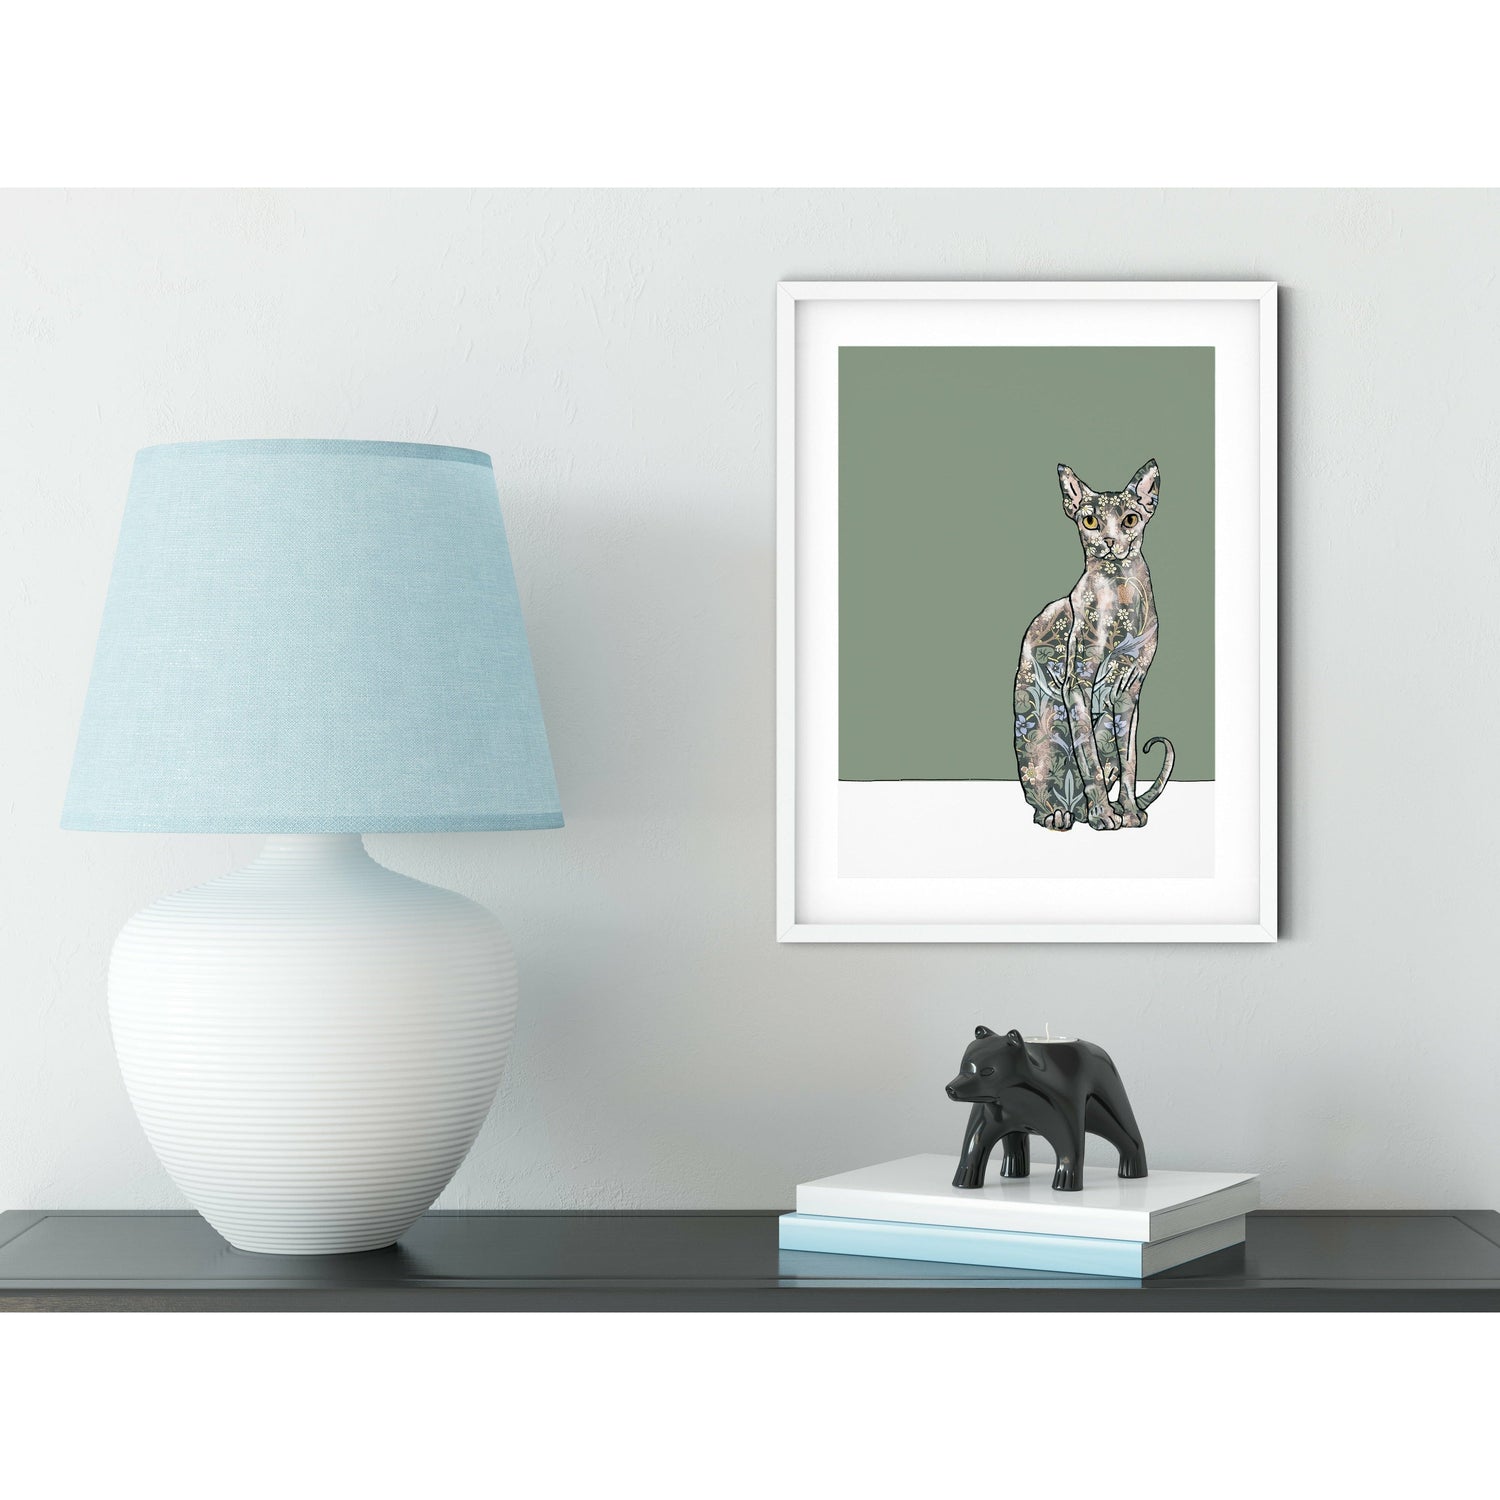 Russian Blue Cat with William Morris coat - The Paper People Greeting Cards